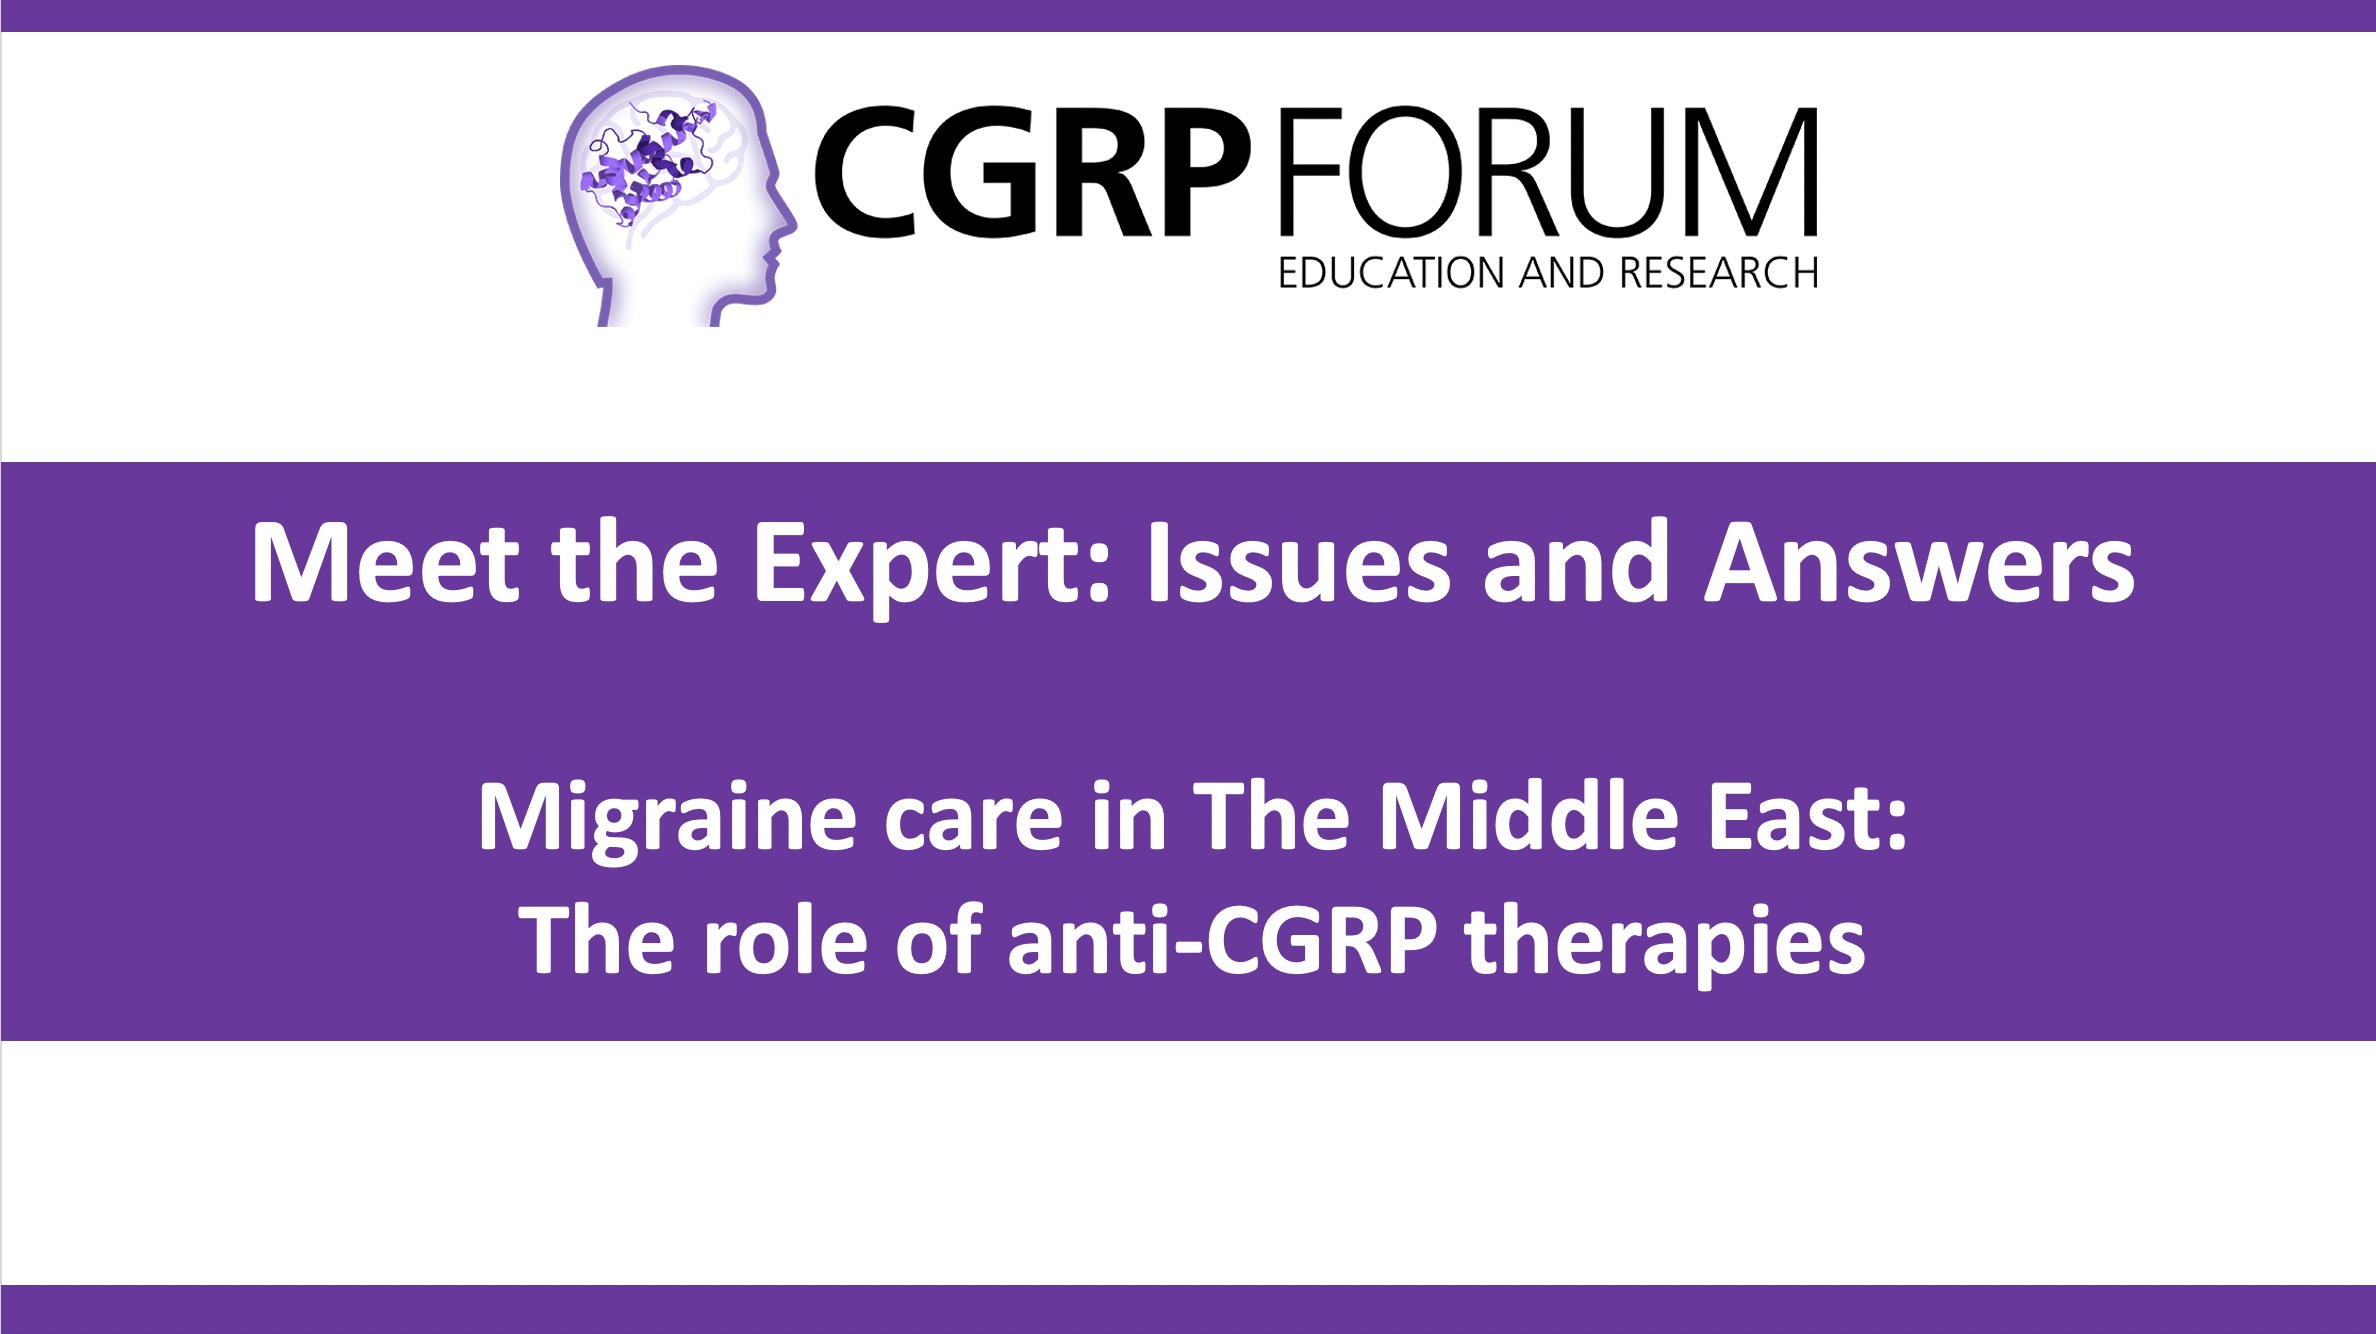 Migraine care in the Middle East